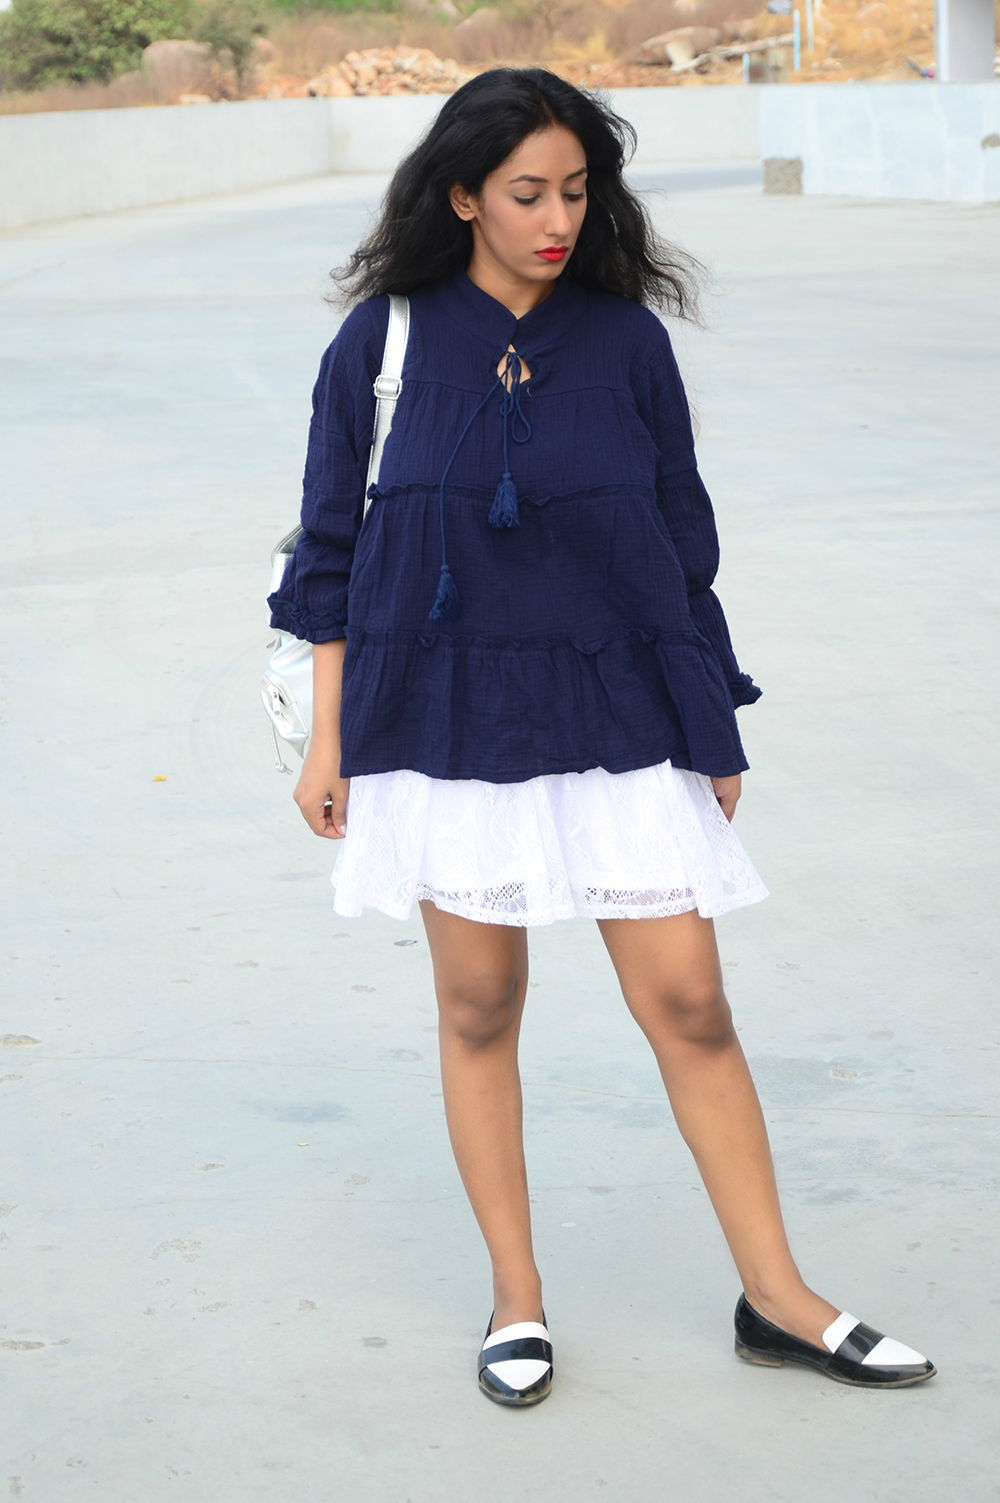 Lookbook ; Ruffle Top ; Lace; Blue ; Skirt ; Monochrome ; White ; Outfit ; One Roze Hyderabad ; Flowers ; Roses ; Hyderabad Store Launch ; Love ; Ear Cuff ; Red Lips ; Zaful ; Boohoo ; fashion photography ; dusk ; editorial ; strong ; Dark ; summer fashion ; summer outfit ; spring ; summer 17; boho look ; Naznin ; Naznin Suhaer ; dusky; model ; indian blogger ; hyderabad fashion bloggers ; hyderabad bloggers ; hyderabad fashion blogger ; I Dress for the Applause ; 